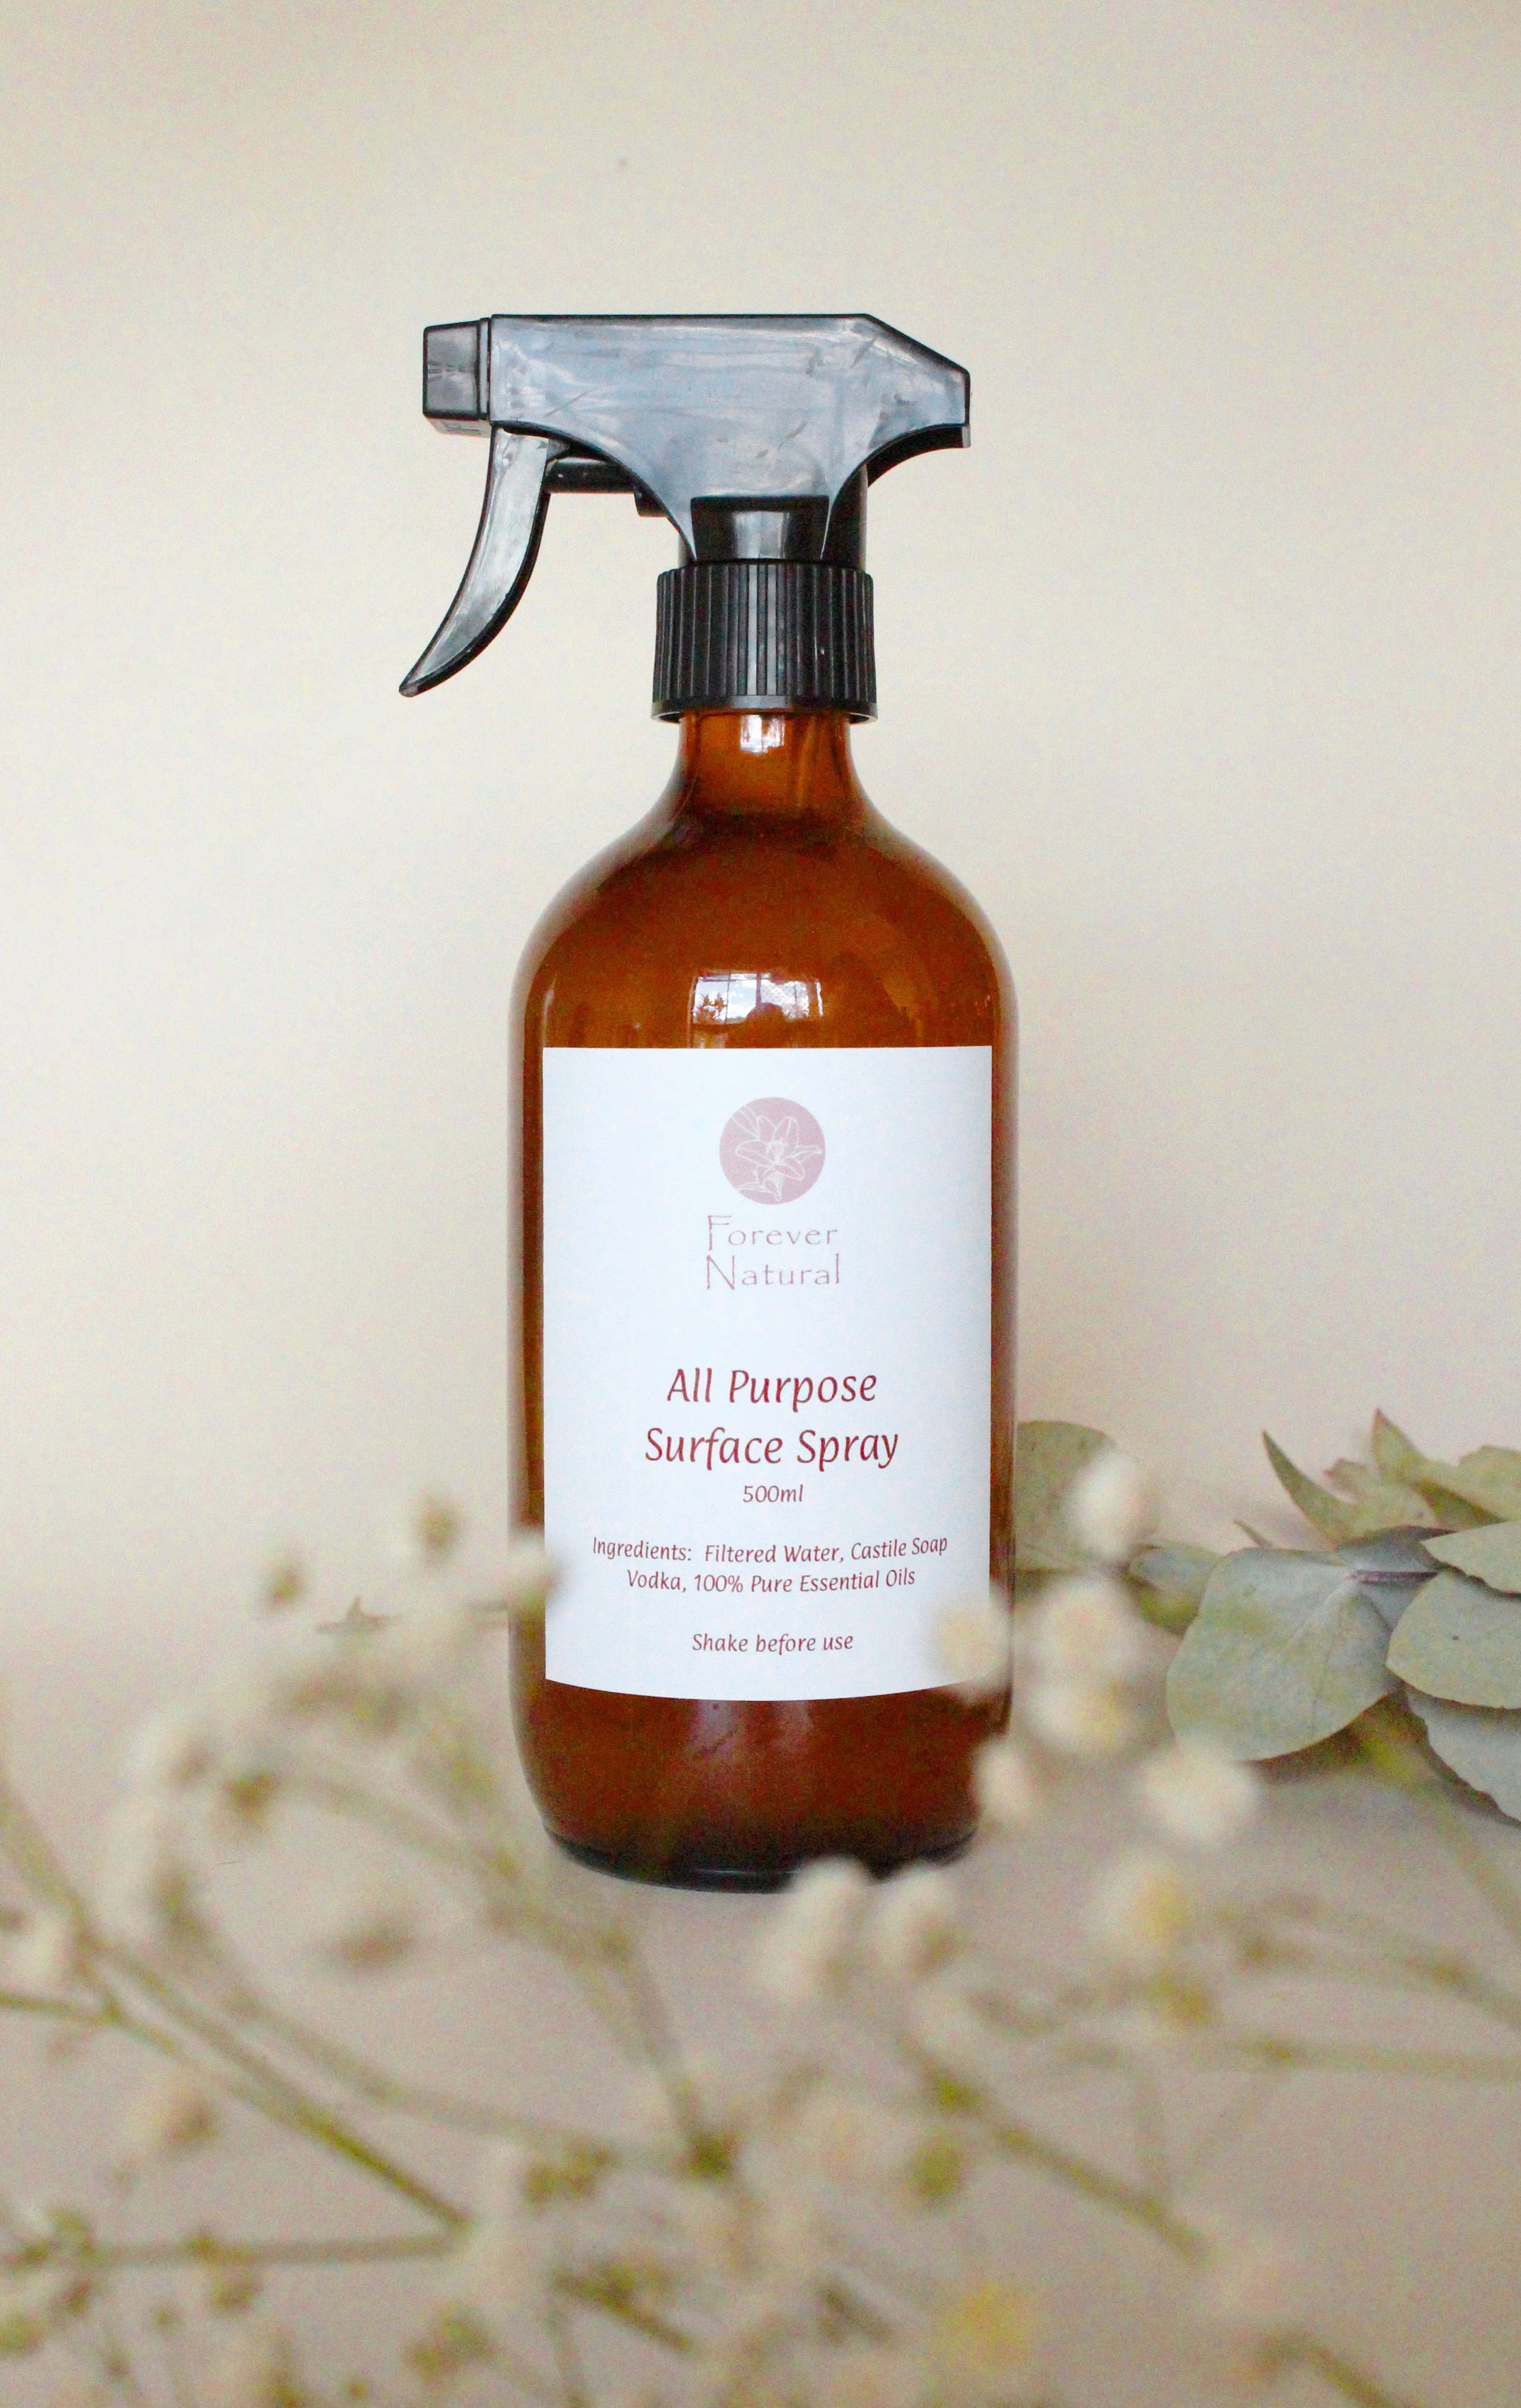 Lovingly made natural body & cleaning products with essential oils.